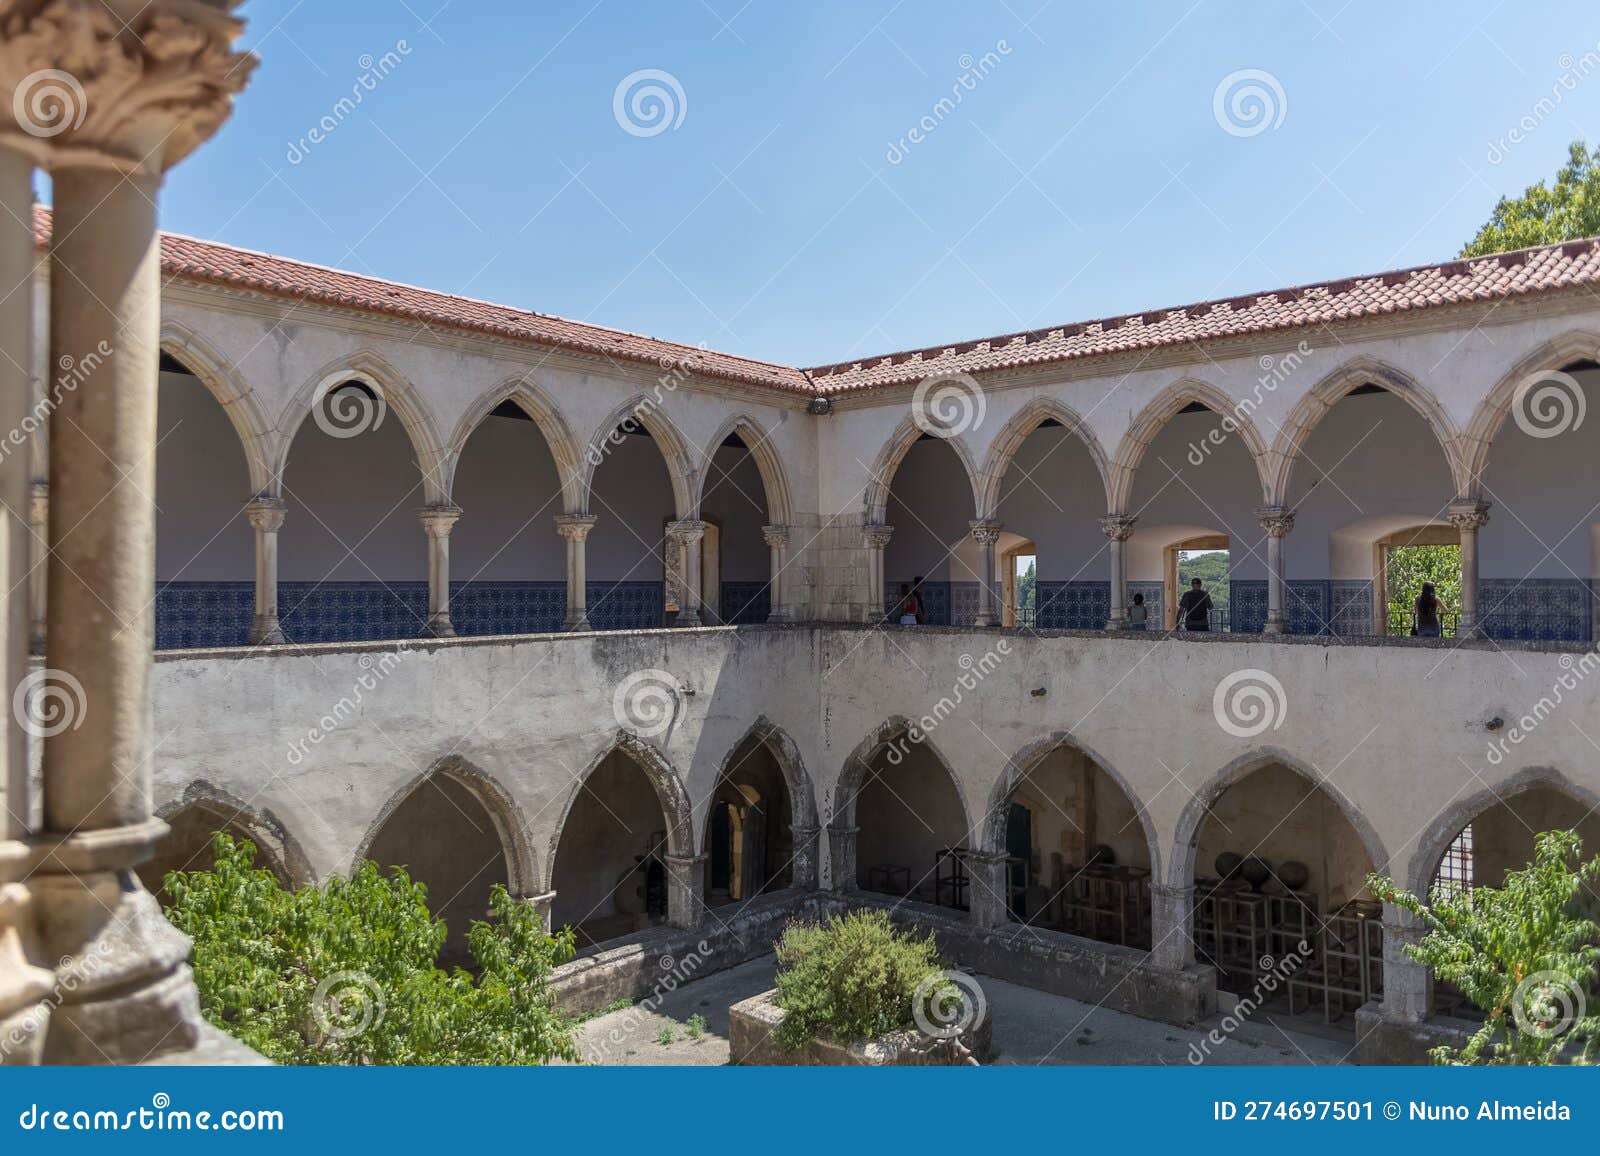 view at the ornamented romanesque wash cloister, or claustro da lavagem, an iconic piece of the portuguese romanesque type, on